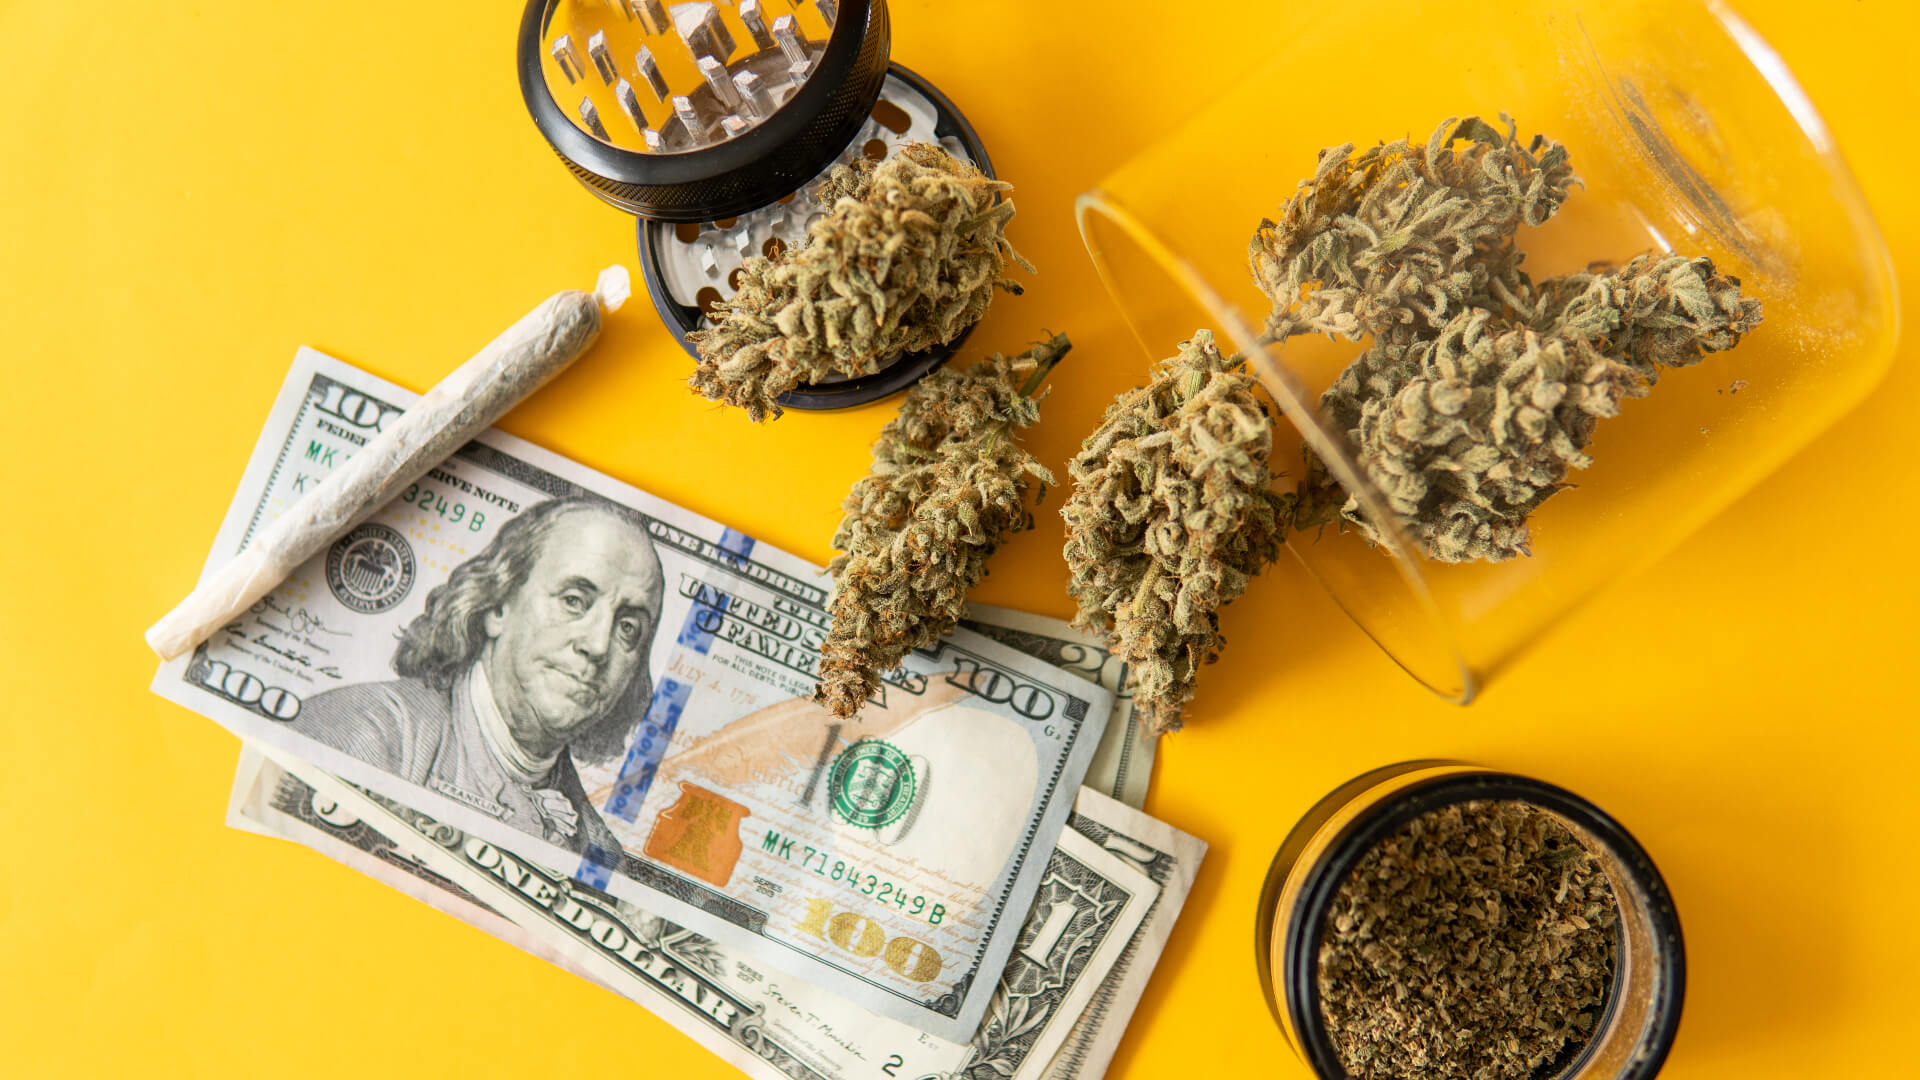 Yellow background with money, joints, a grinder, and green buds lying on the surface